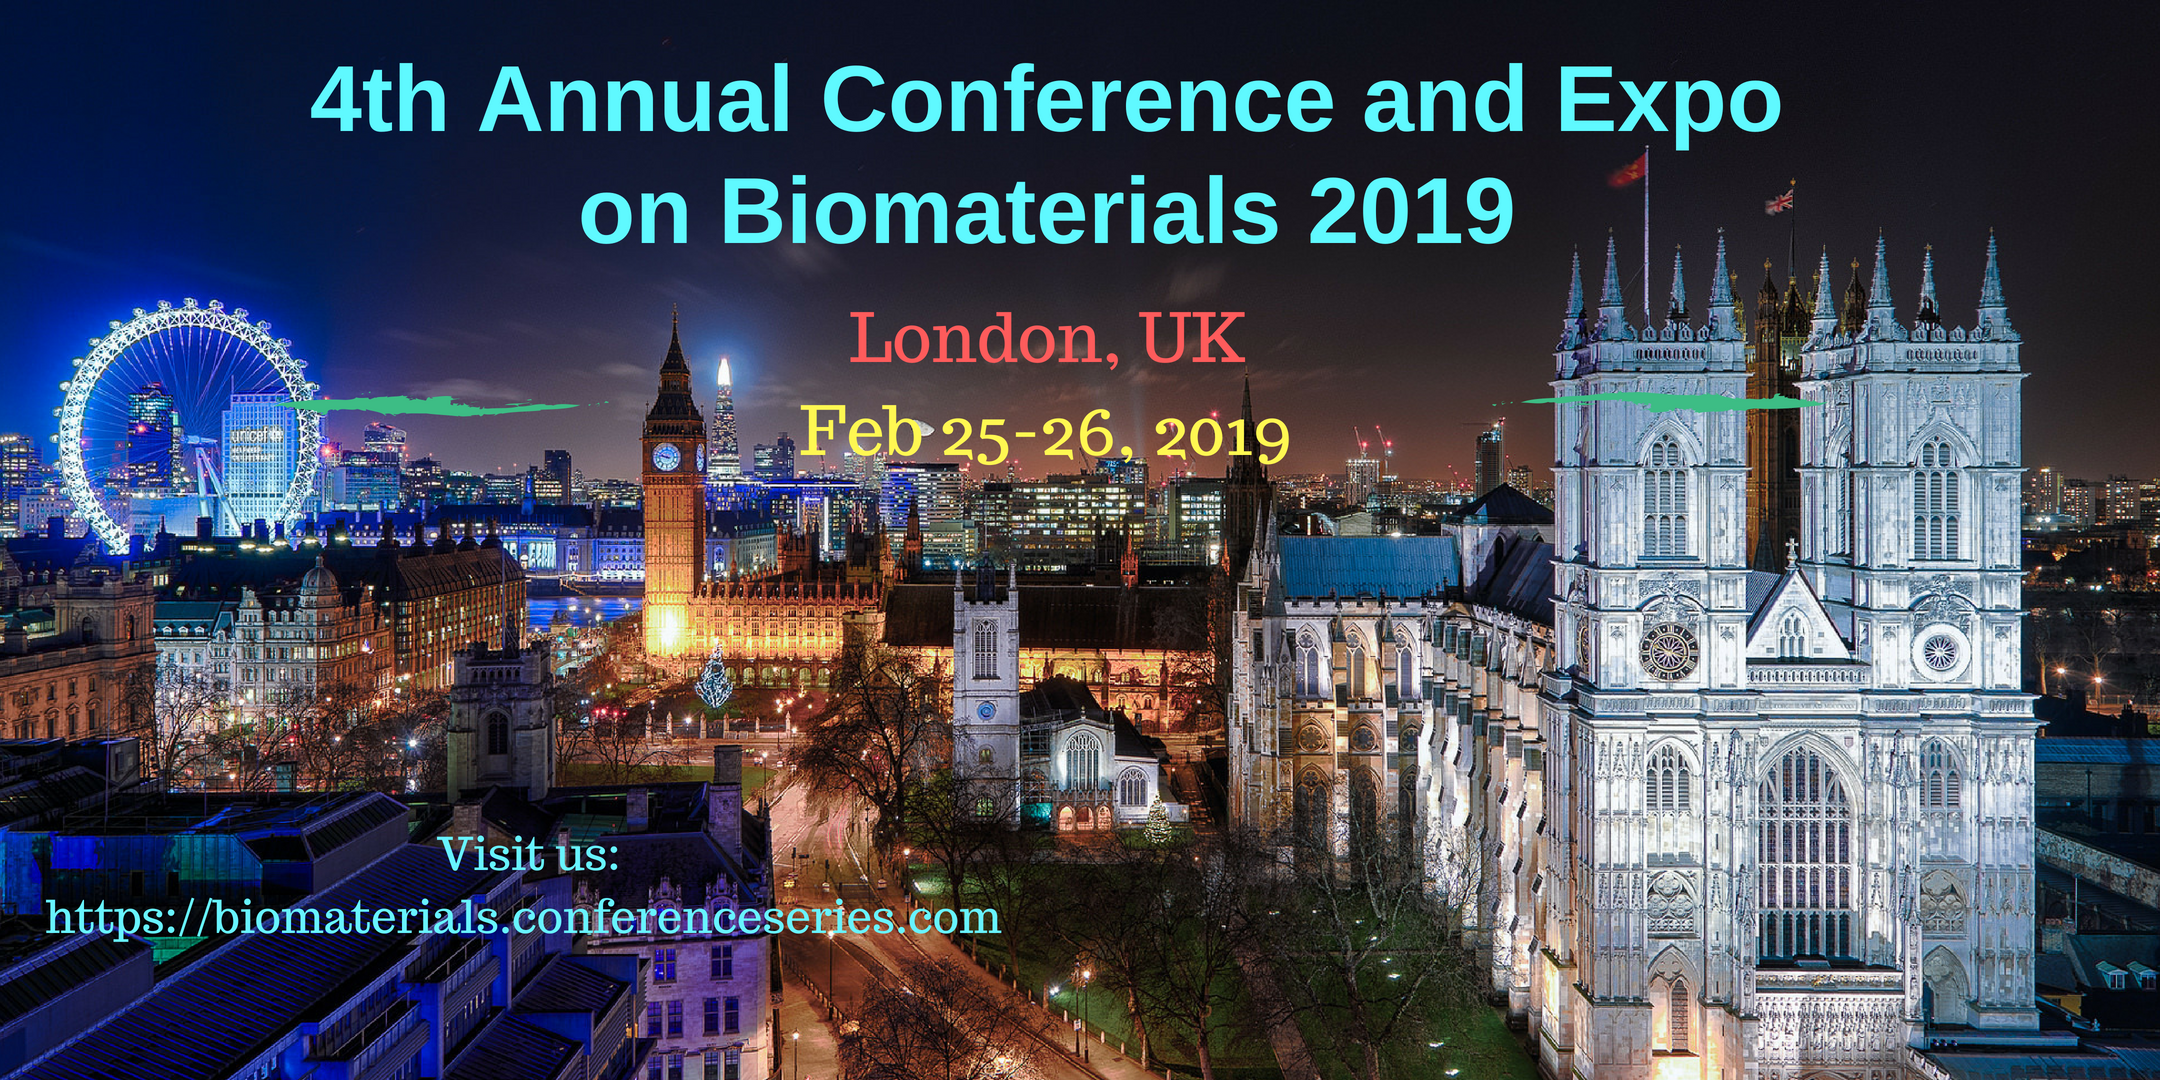 4th Annual Conference and Expo on Biomaterials 